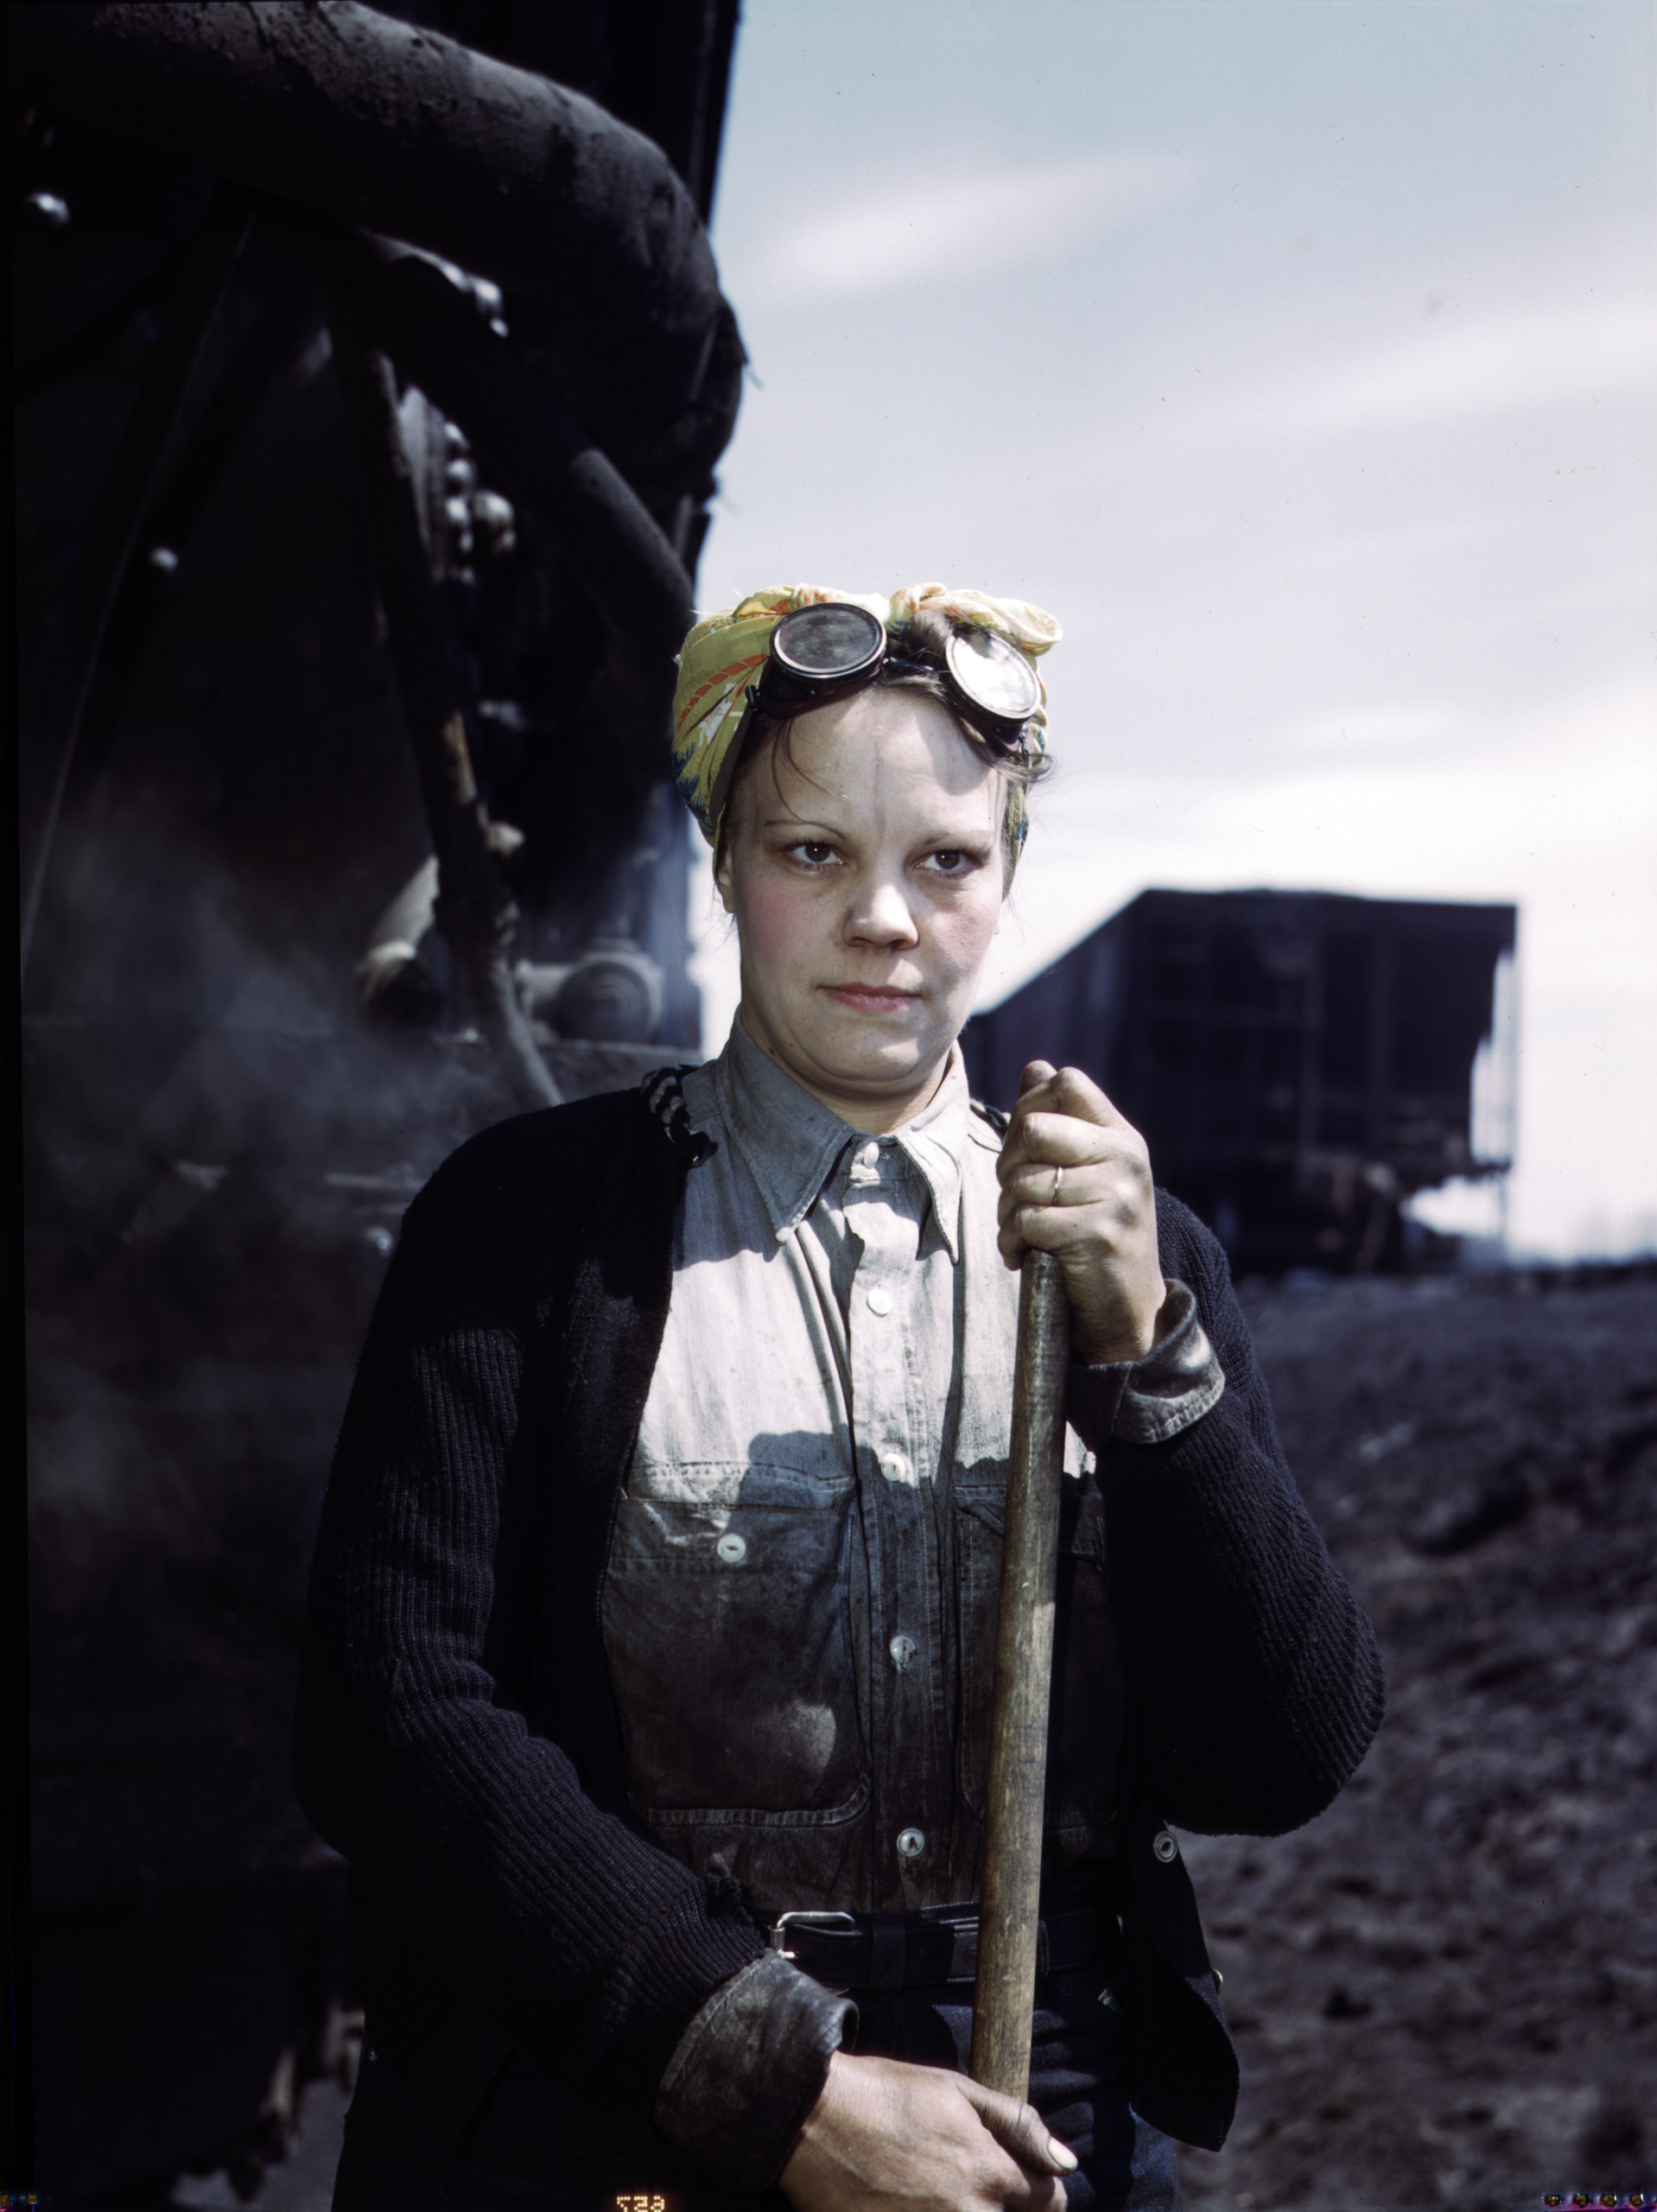 Chicago and North Western Railway Company, Mrs. Irene Bracker, mother of two children, employed at the roundhouse as a wiper, Clinton, Iowa. April 1943. Photographed by Jack Delano for the Farm Security Administration.